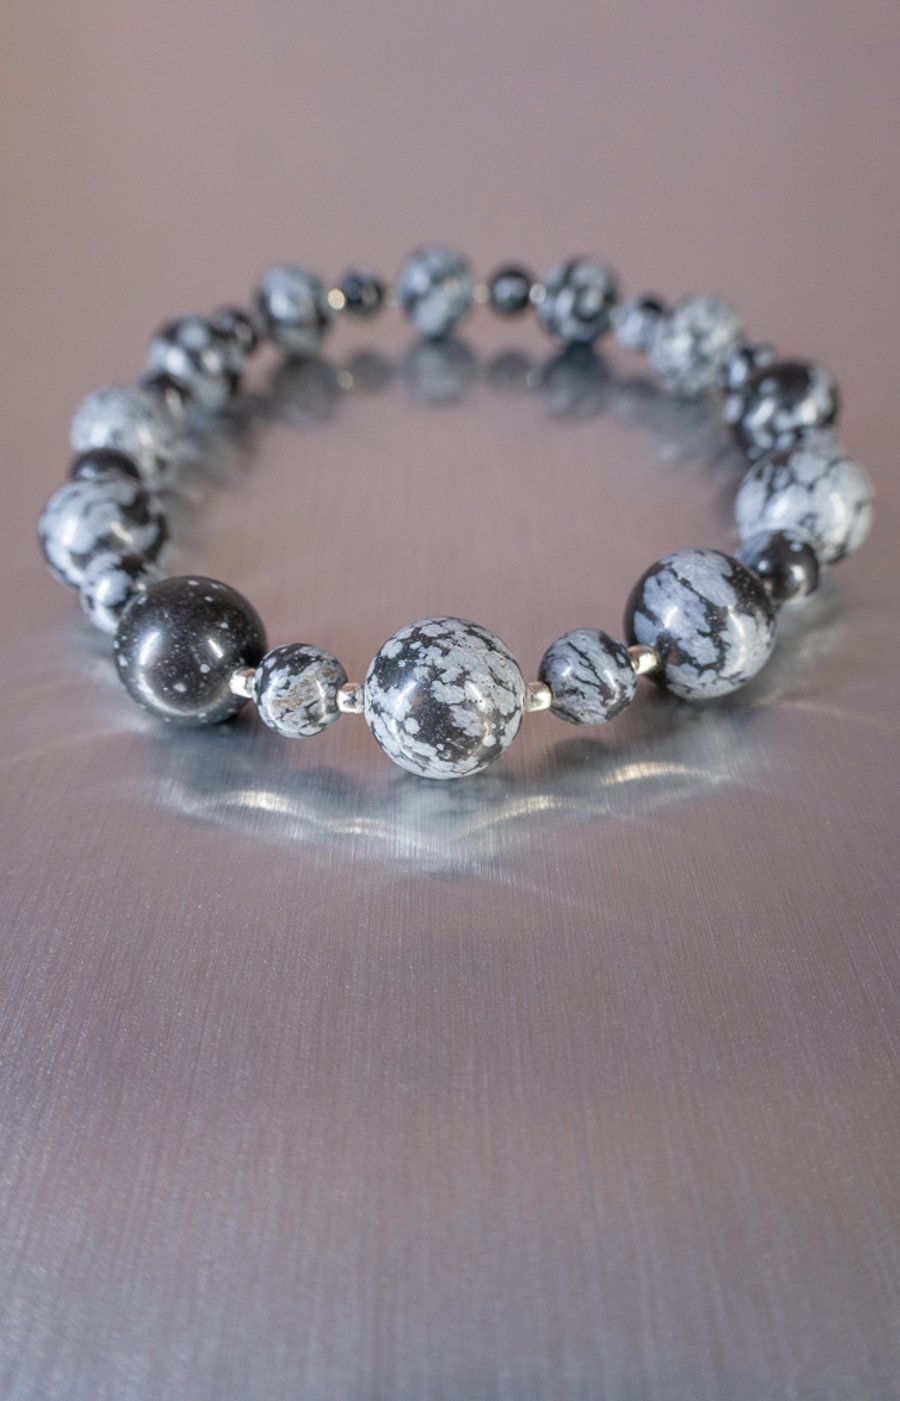 Bracelet Snowflake Obsidian and Sterling Silver Stretchy handmade